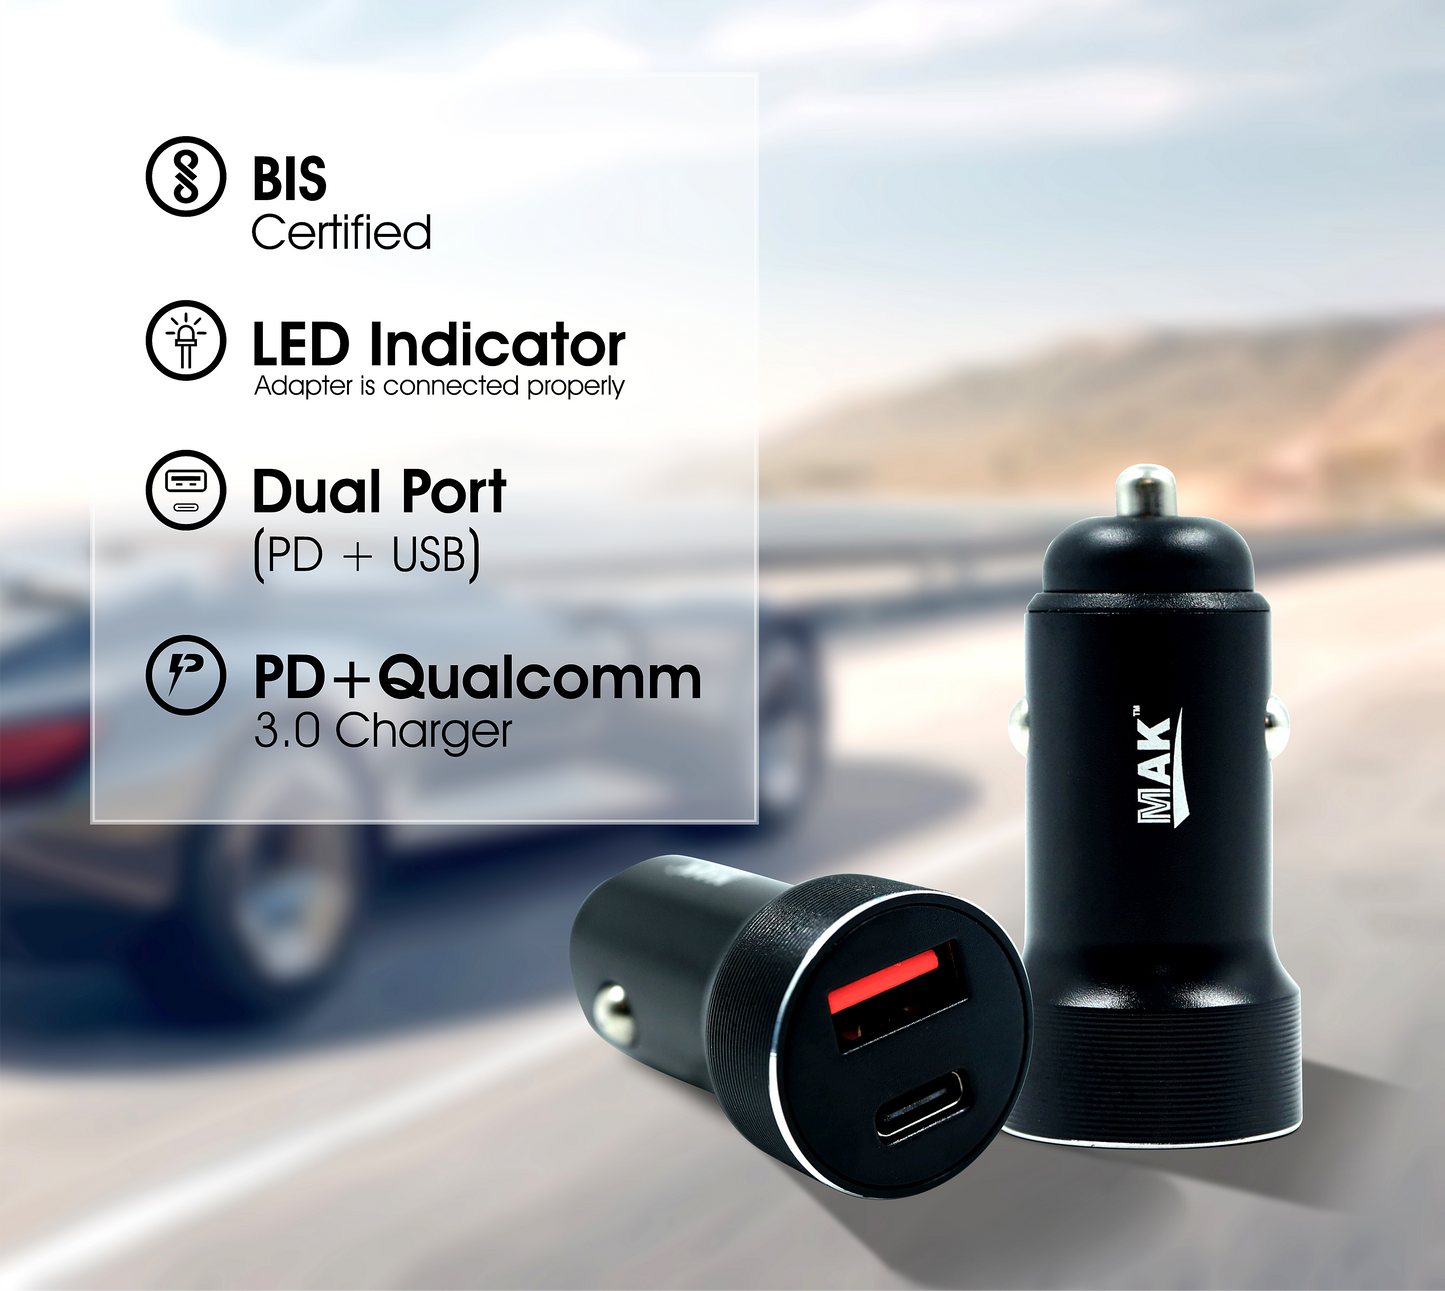 25W Dual Port Car Charger with Type C PD Cable (Black)